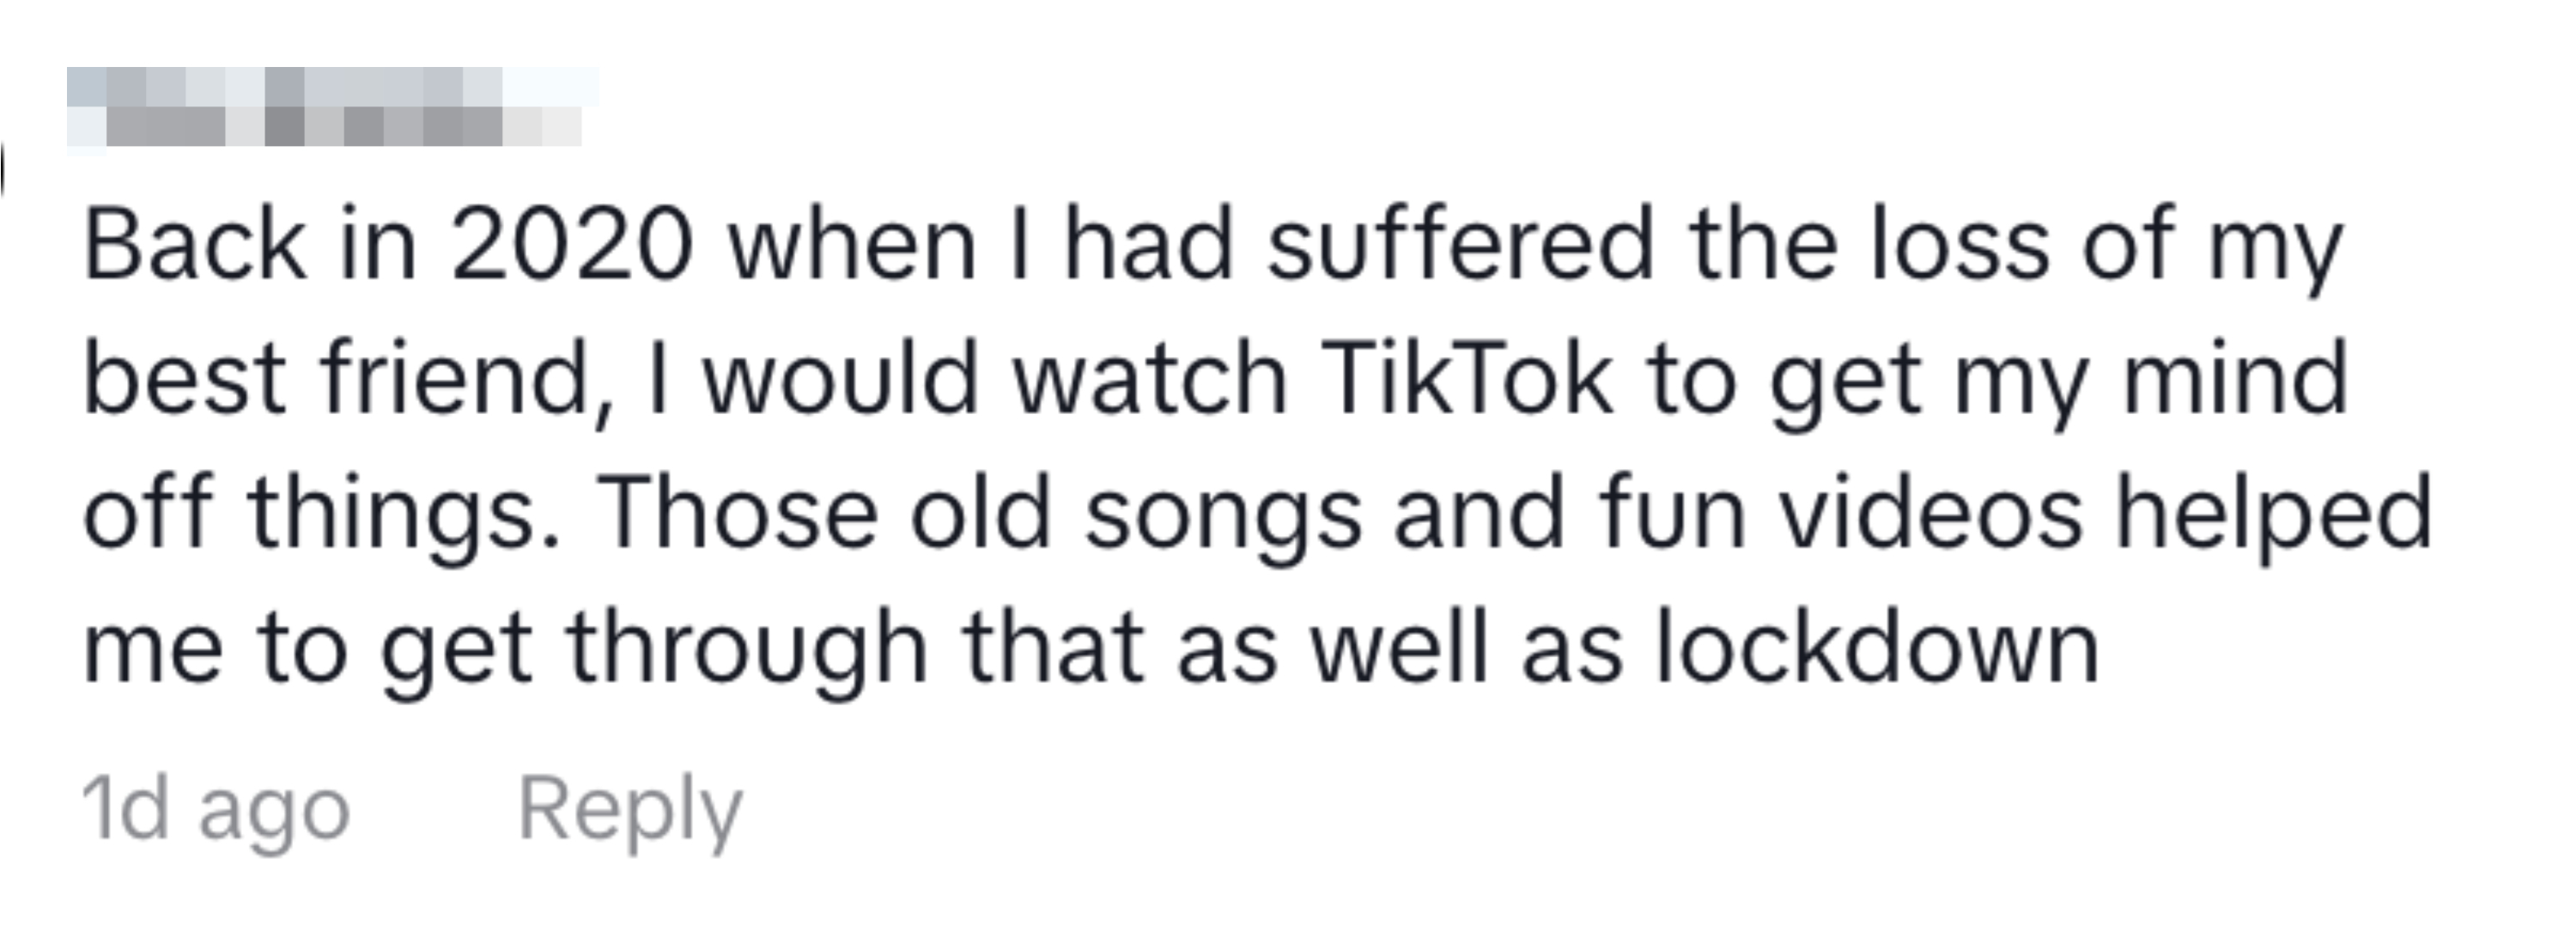 Comment reflecting on coping with loss and lockdown through TikTok videos and old songs